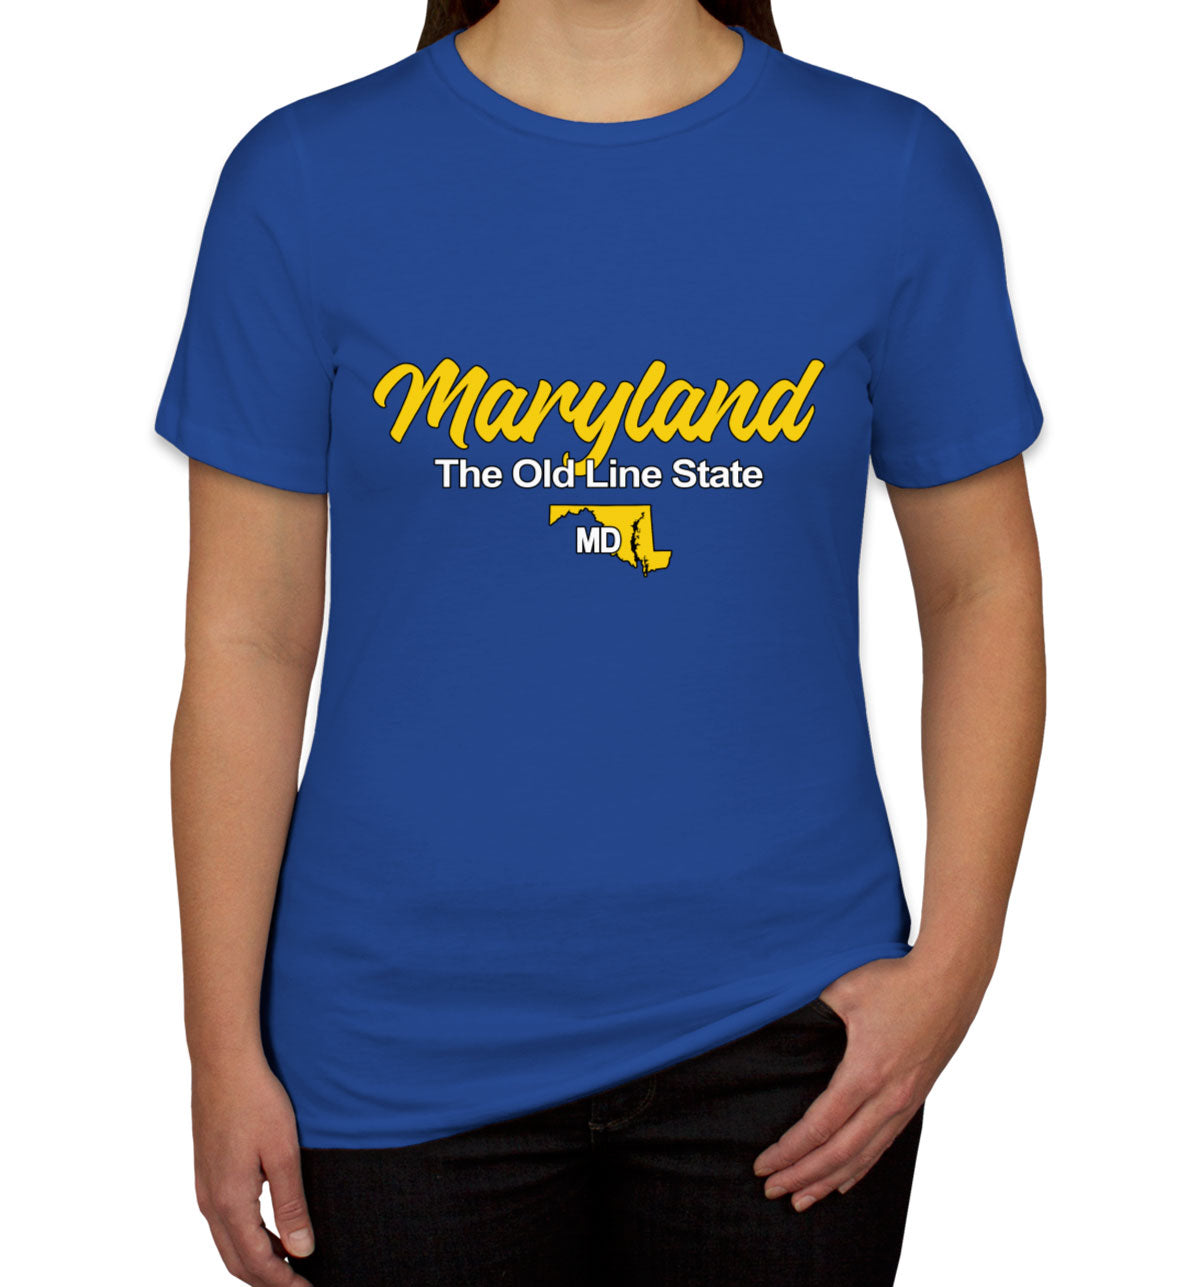 Maryland The Old Line State Women's T-shirt